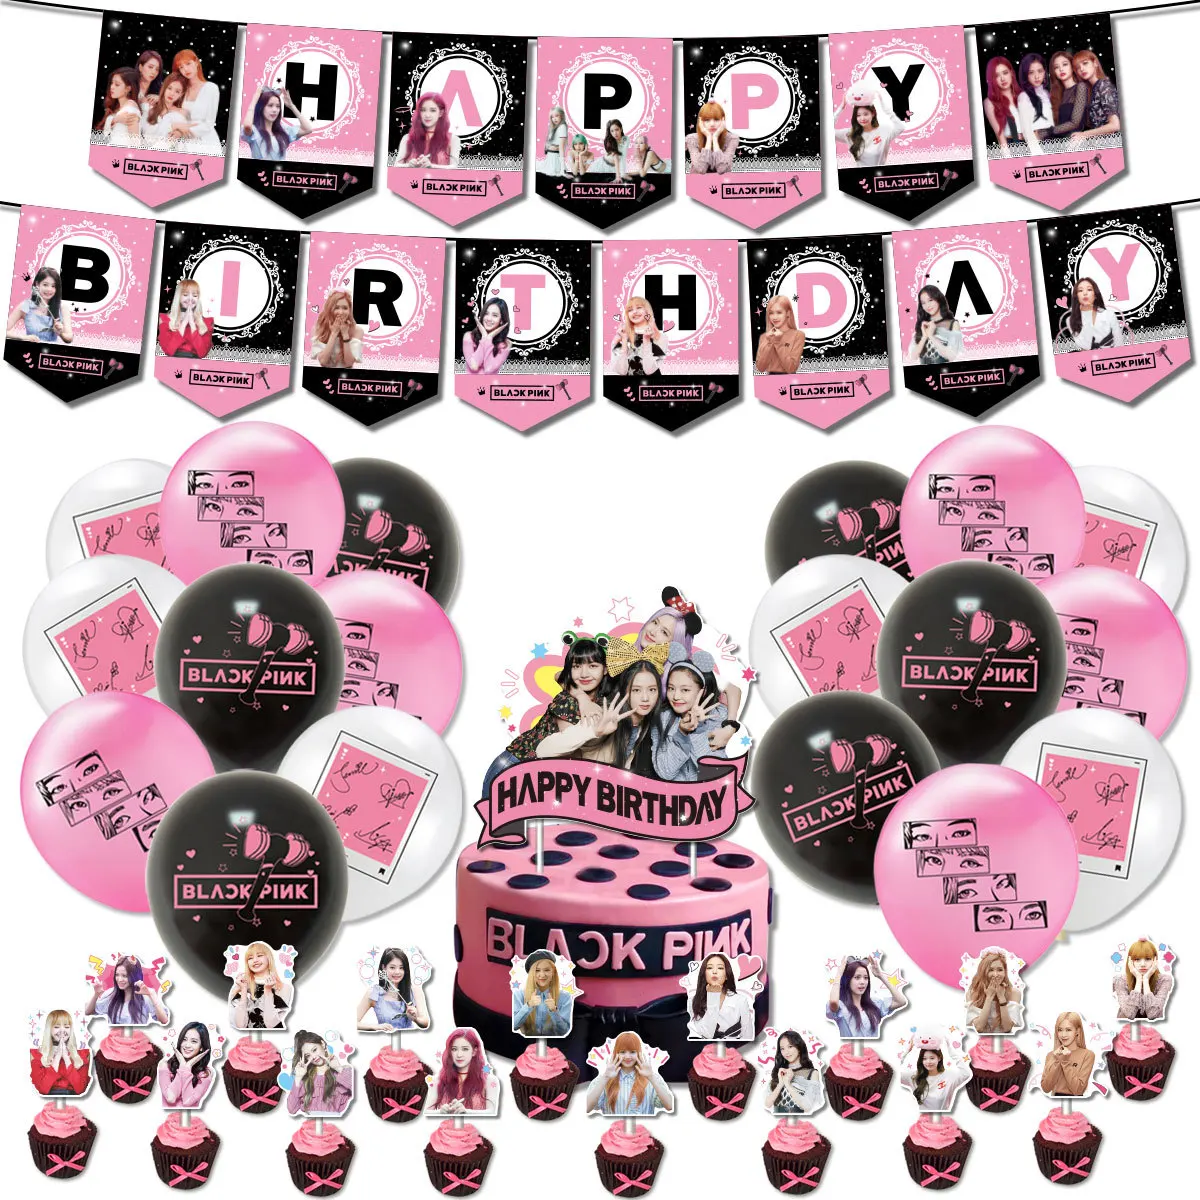 

Kpop Black Birthday Party Supplies Includes Banner Cake Topper Cupcake Toppers Balloon for Girl Pink Birthday Party Decoration